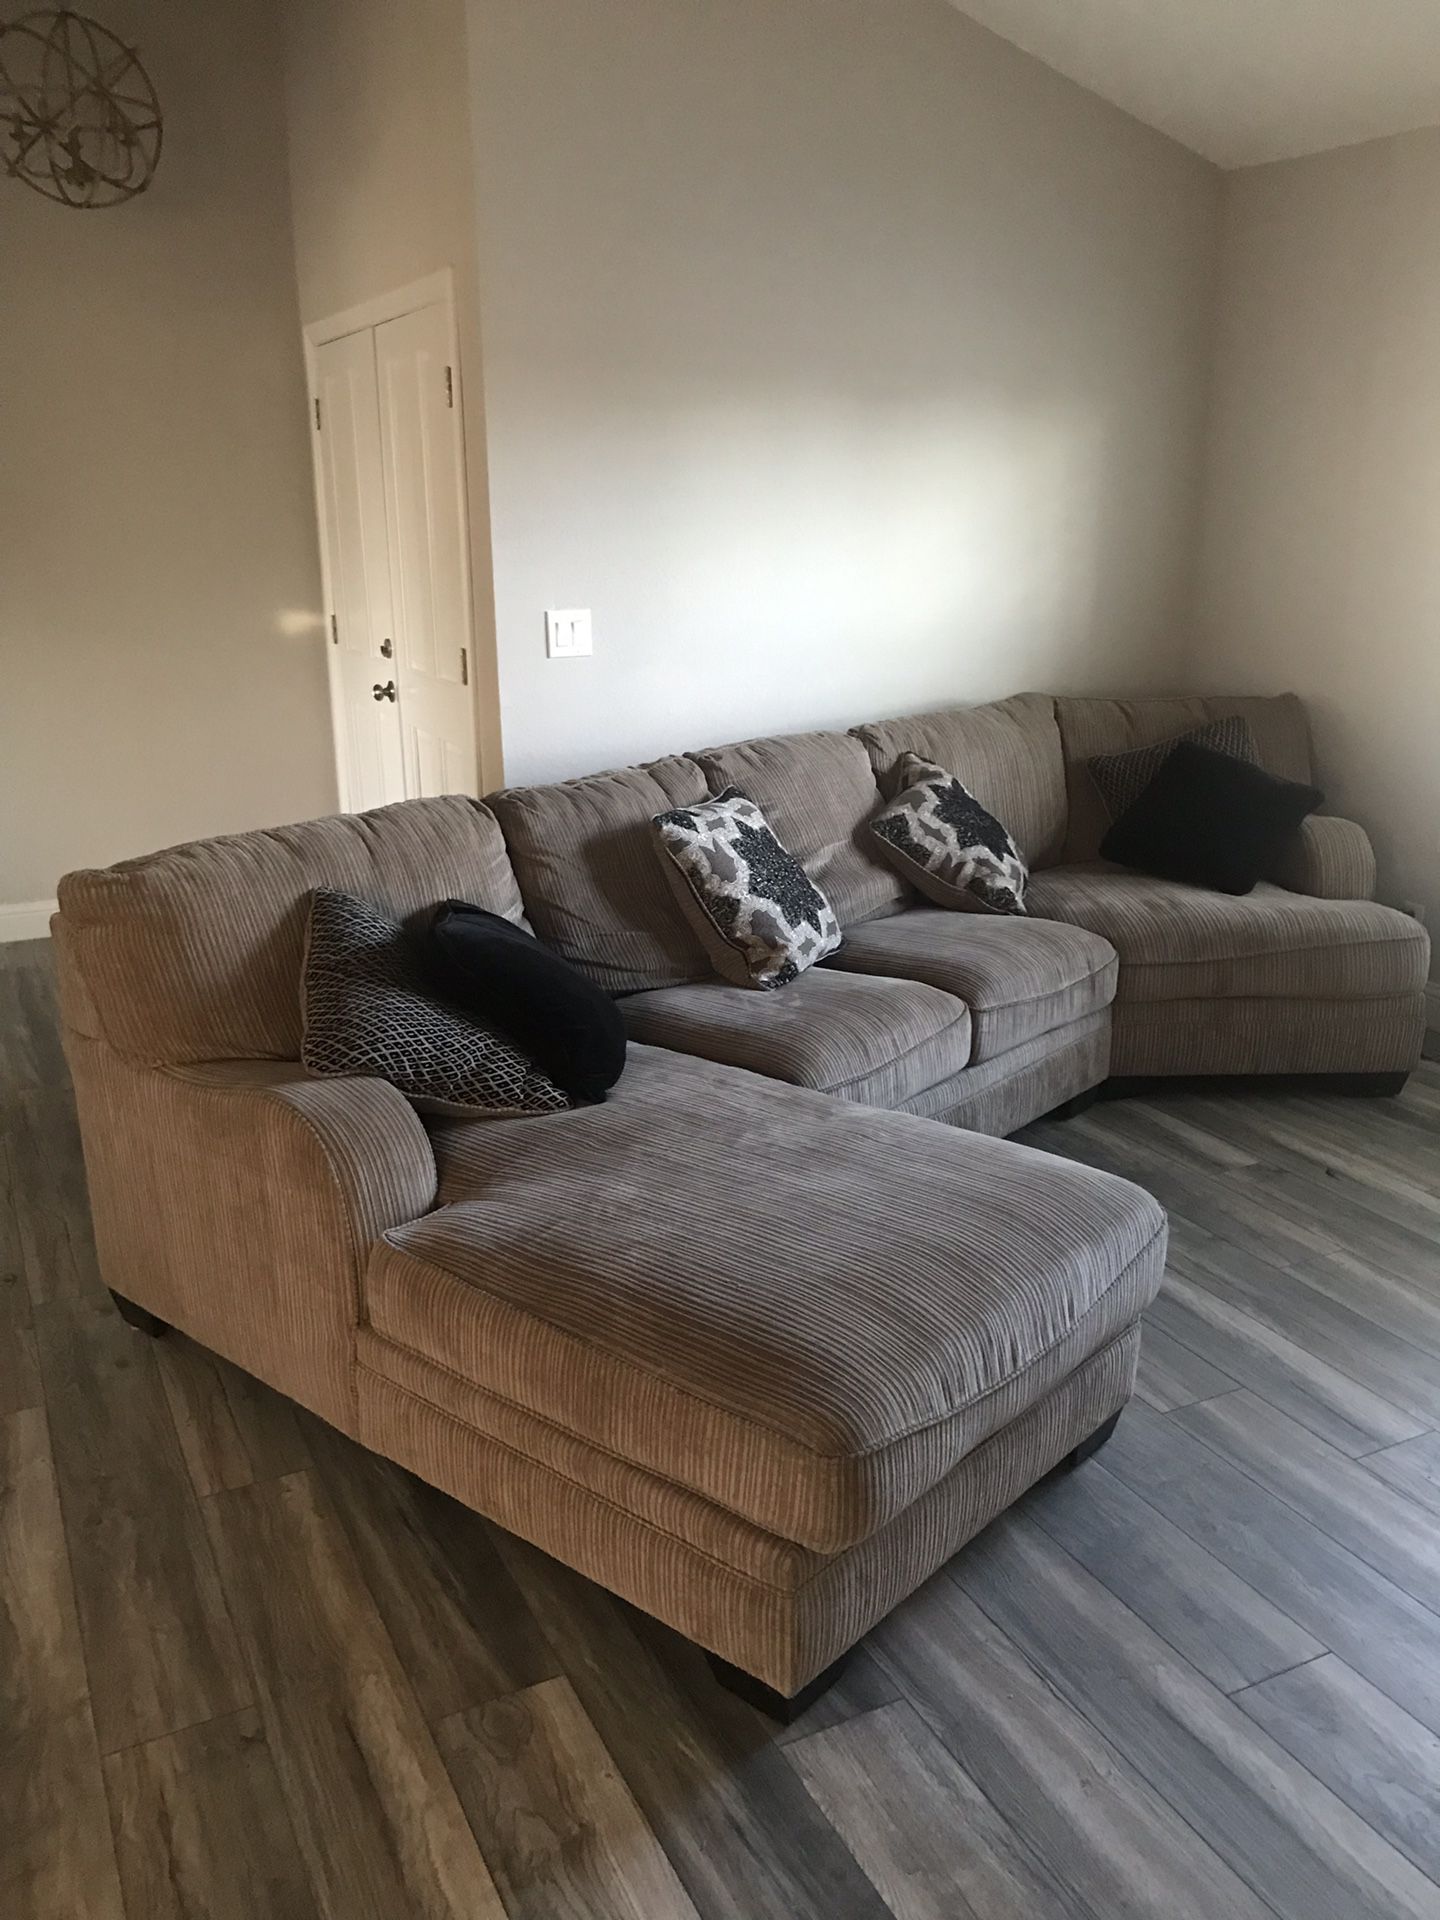 Beautiful sectional and pillows MUST GO!!